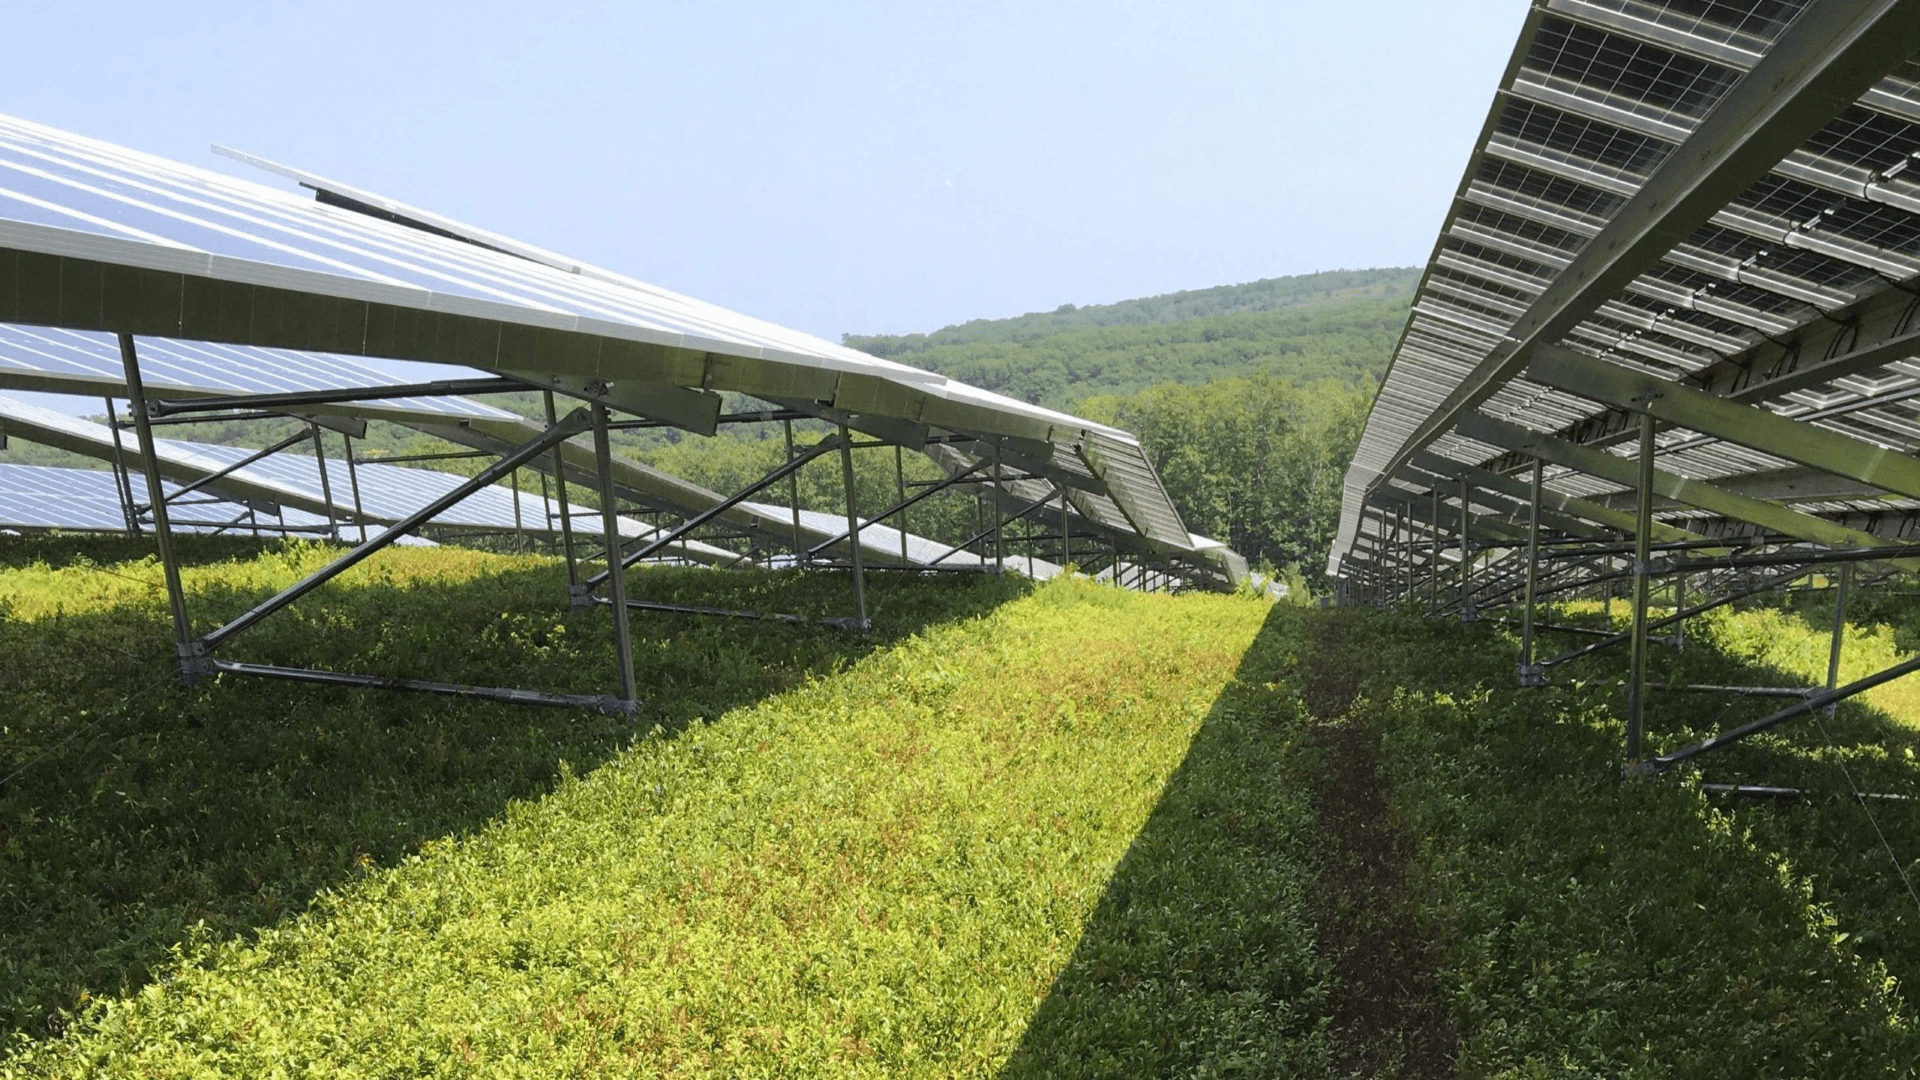 Maine farmer pairs solar panels with wild blueberries. Will the effort bear fruit?